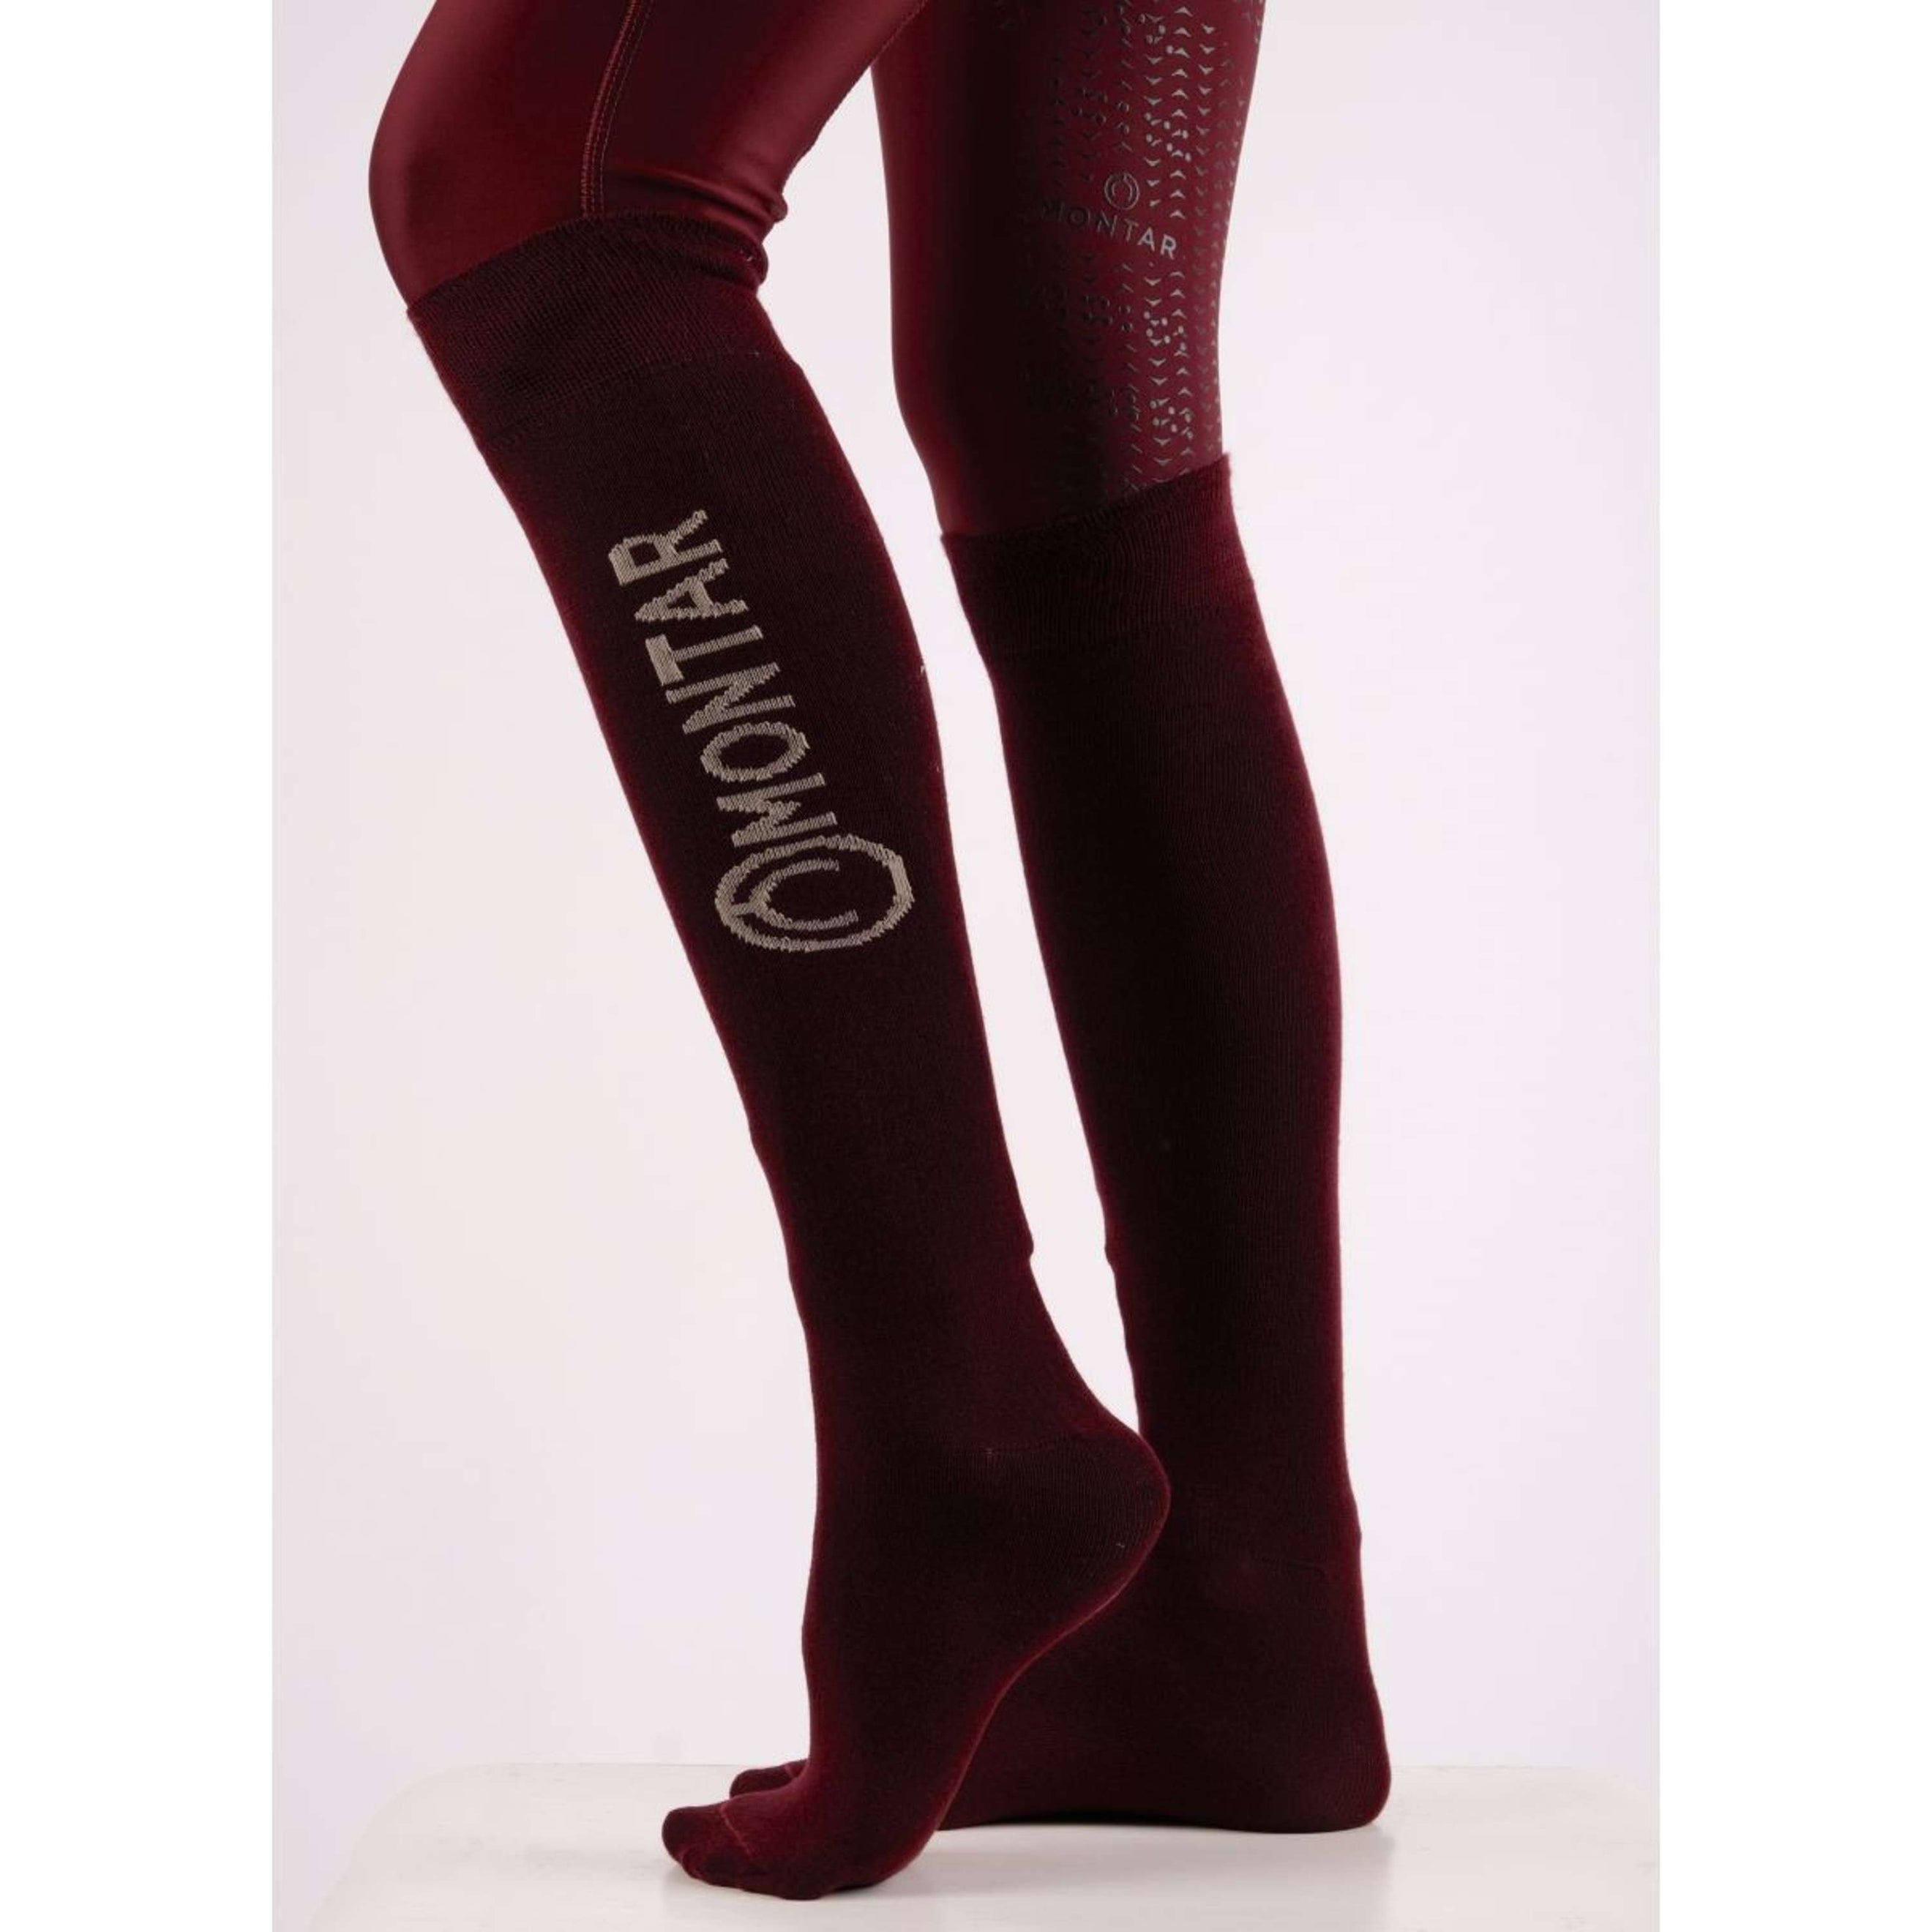 Montar Chaussettes Bamboo Prune